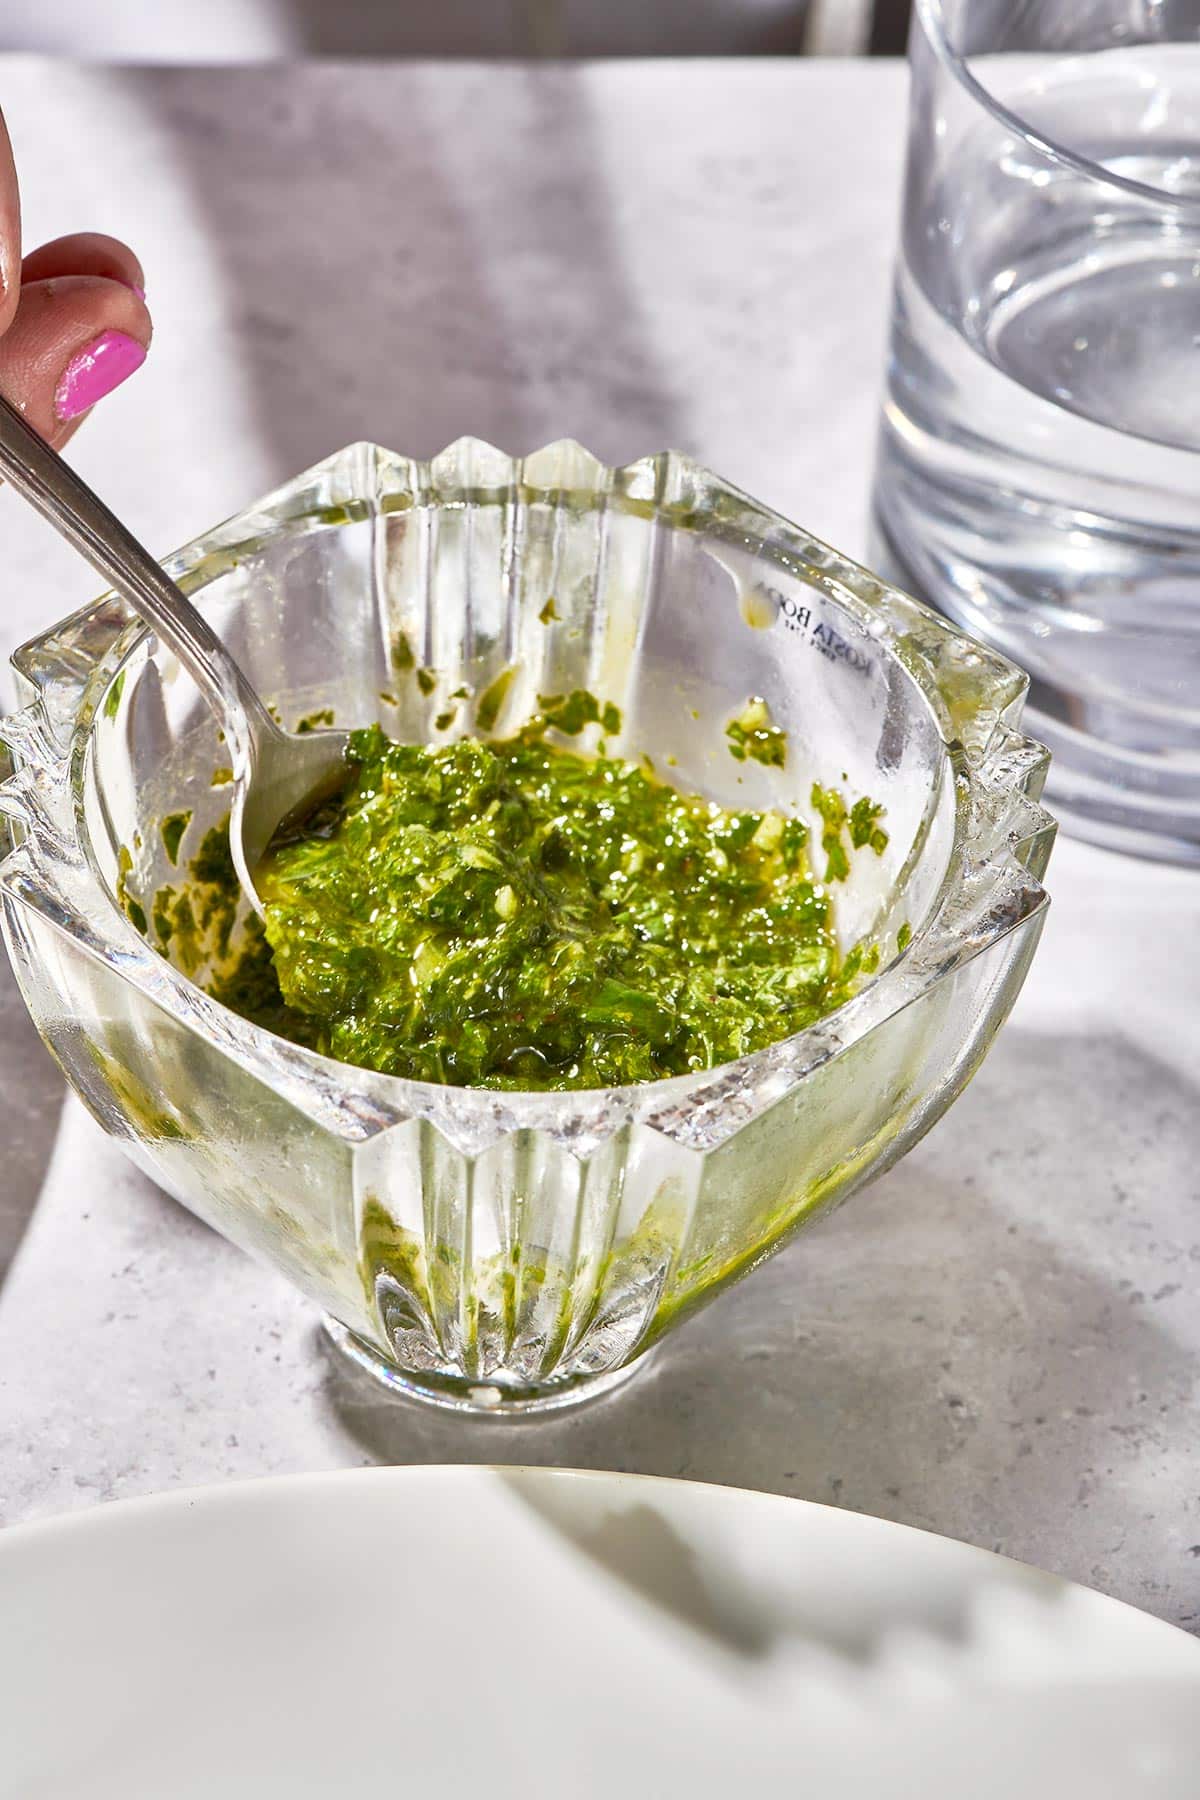 Scooping mint-basil pesto out of glass dish with spoon.